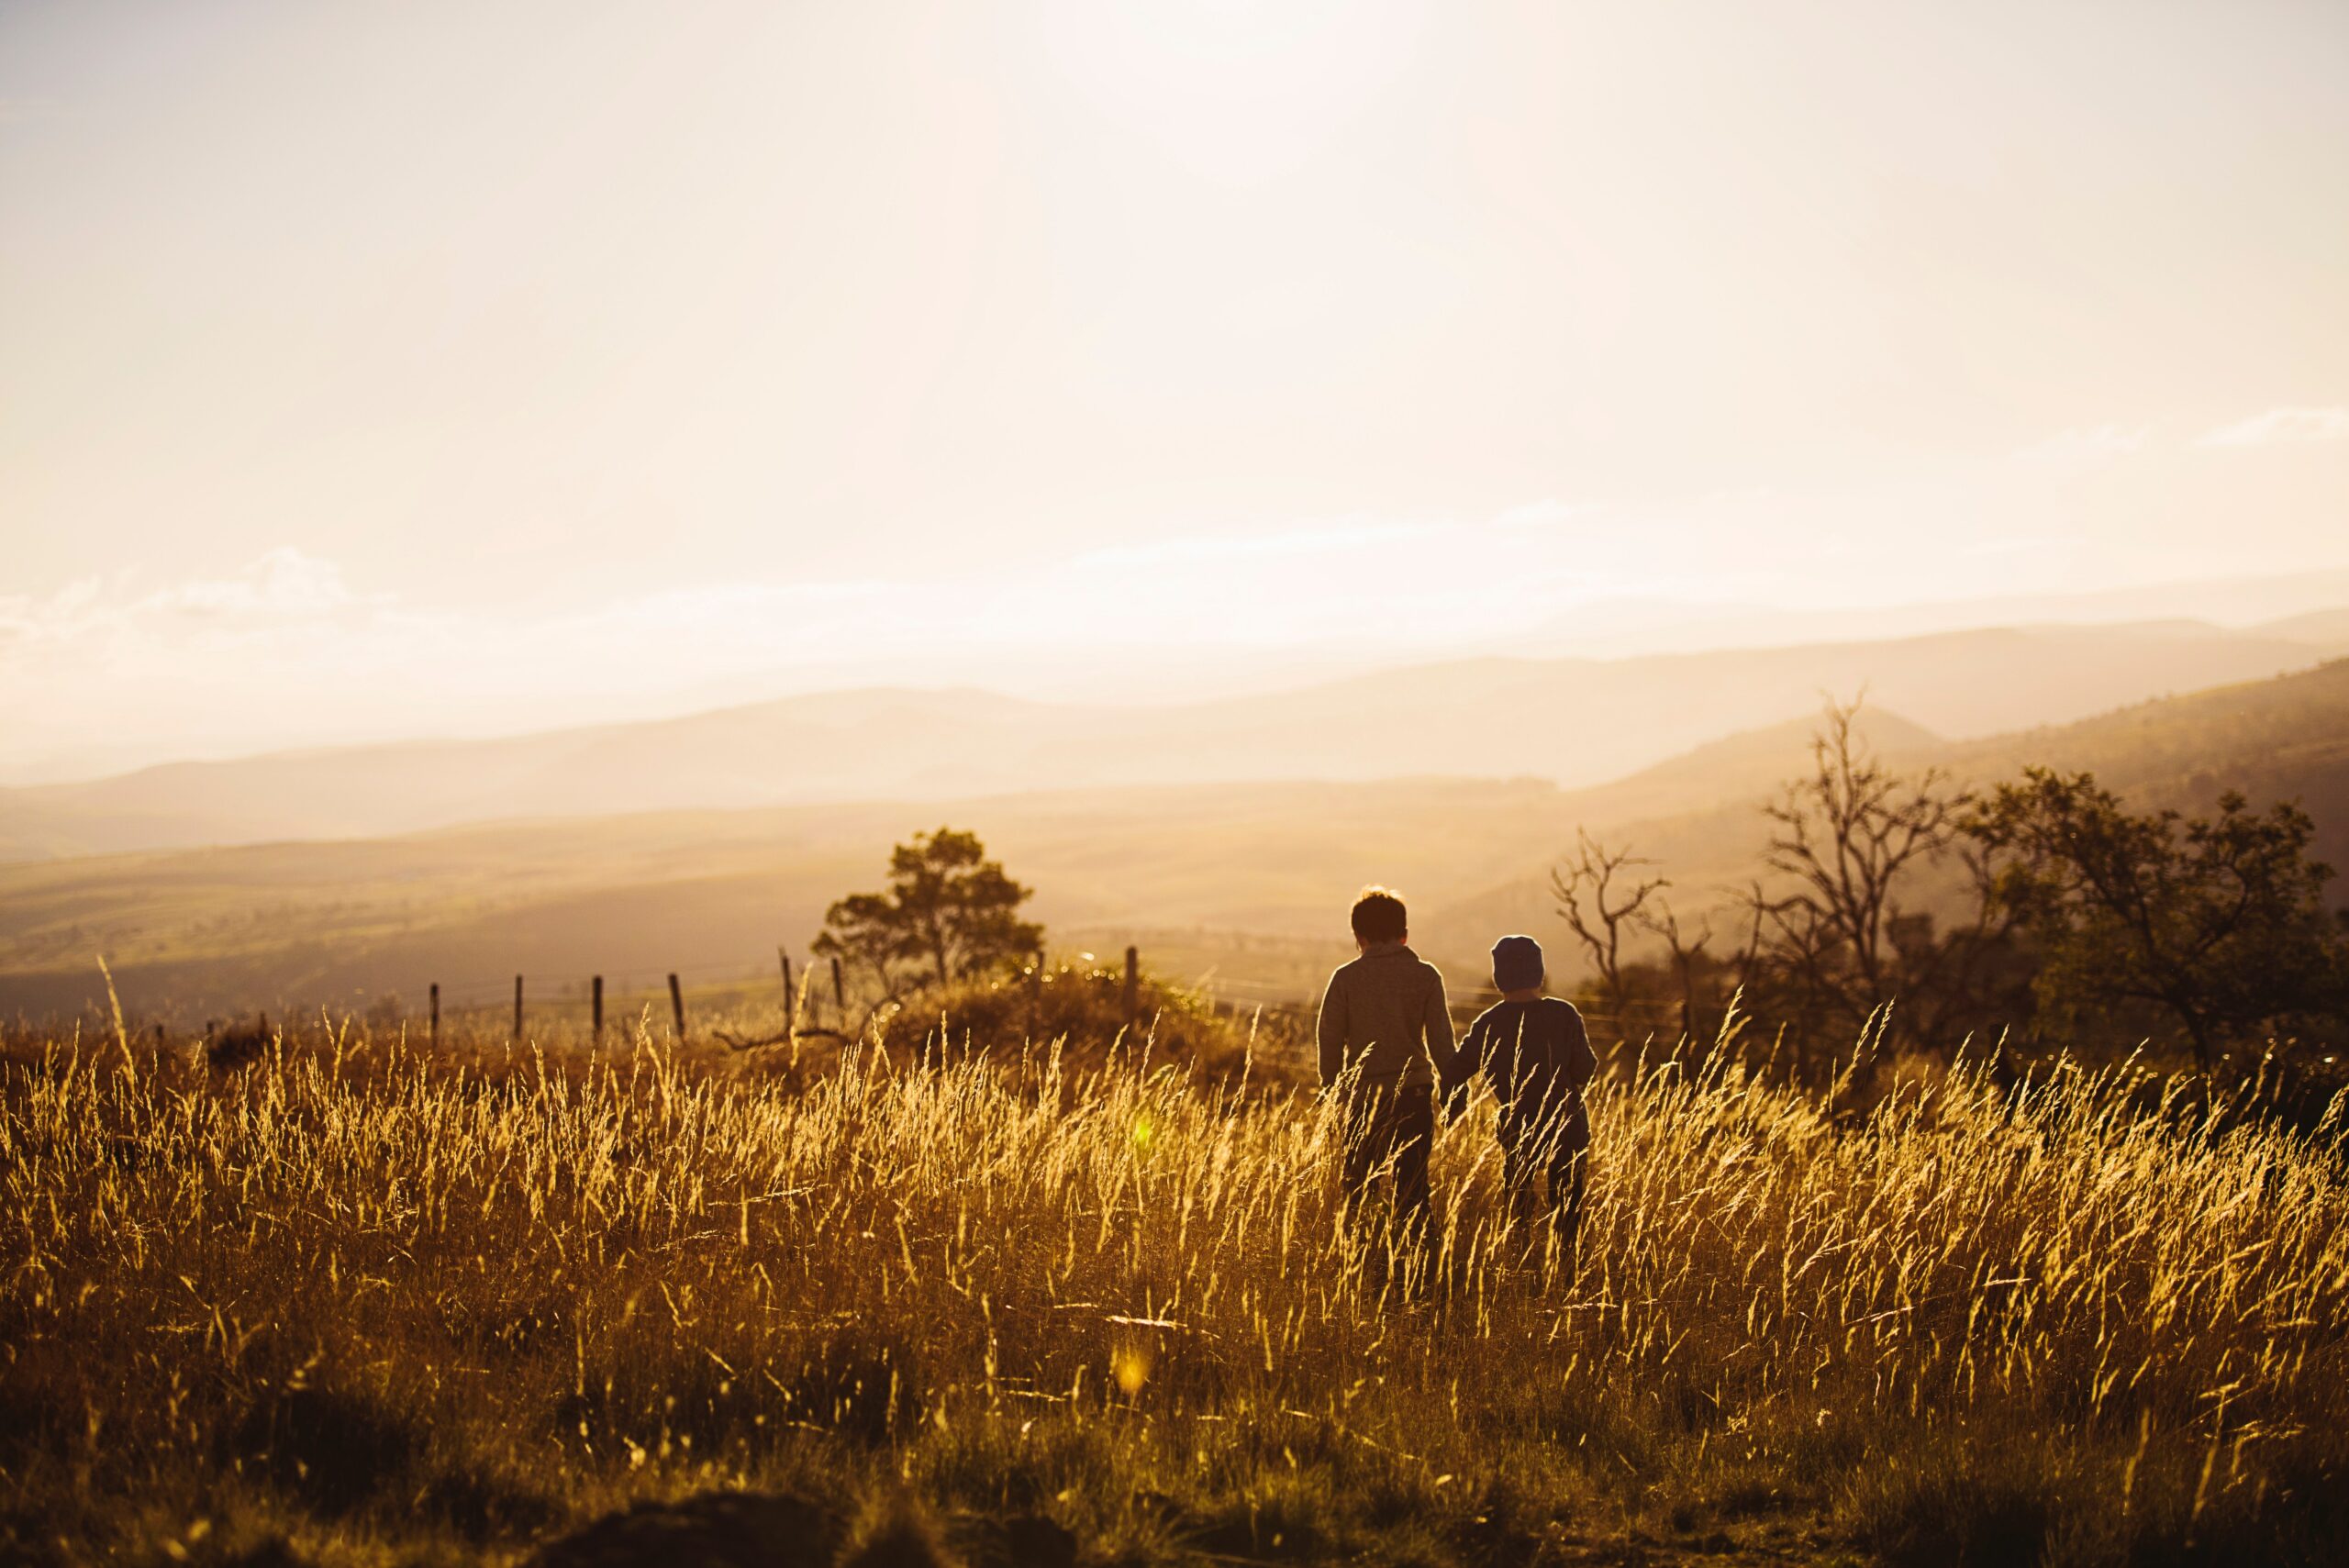 Two children walk in a field at sunset. The image symbolises the importance of human connection and the need to preserve natural spaces to ensure that they remain accessible to all for generations to come. It also represents the importance of promoting sustainable practices that enable us to enjoy nature without causing harm to the environment.